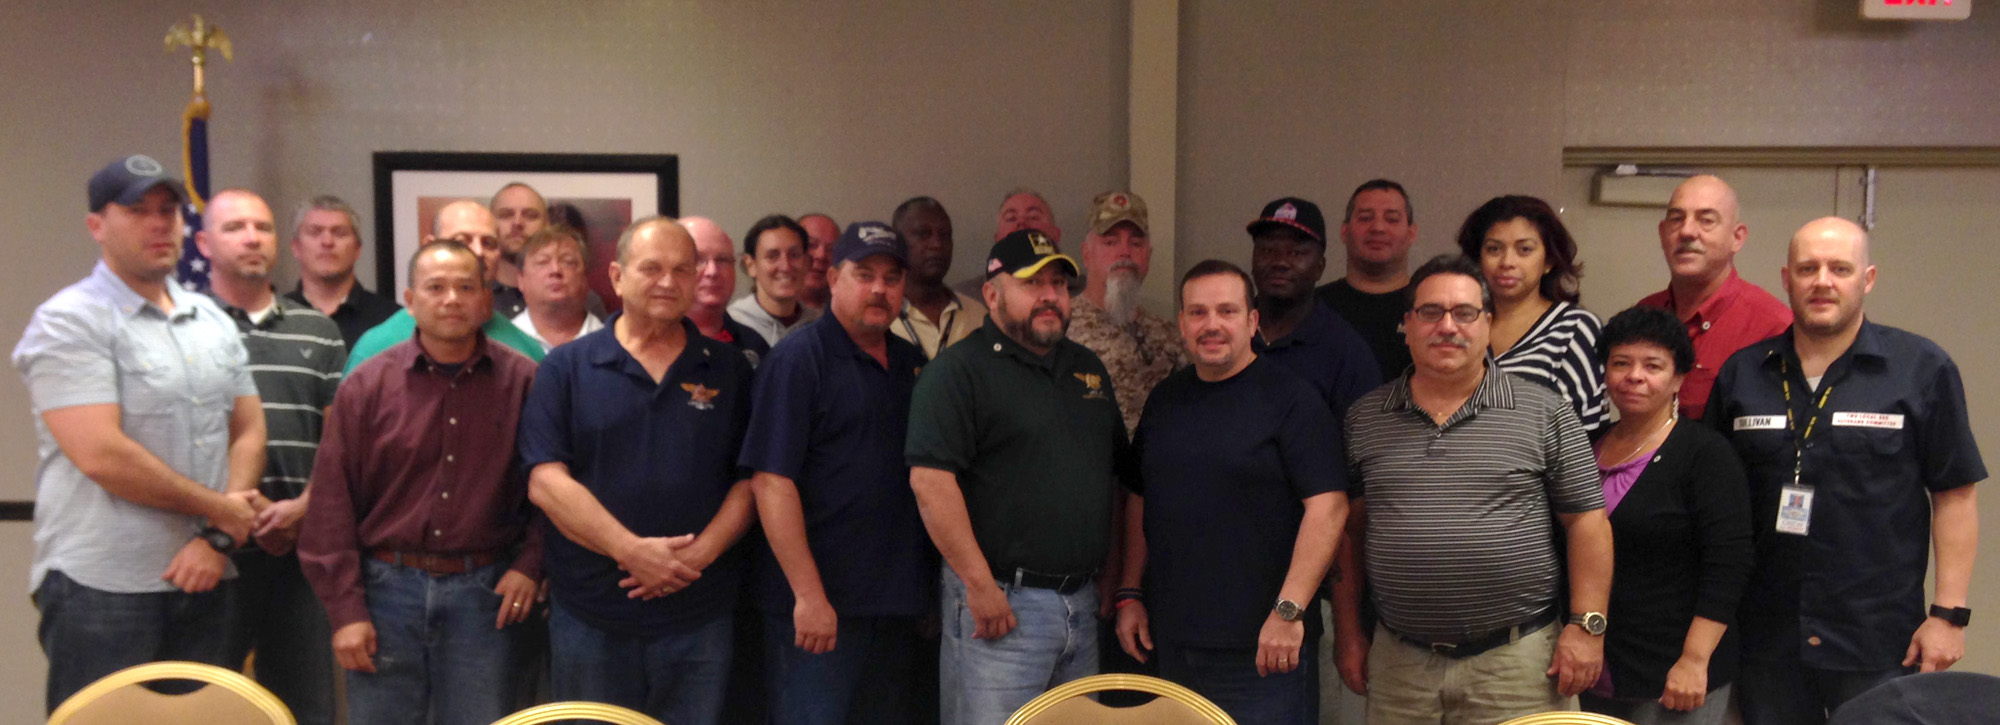 Members of the Veterans Committee at their meeting in Chicago